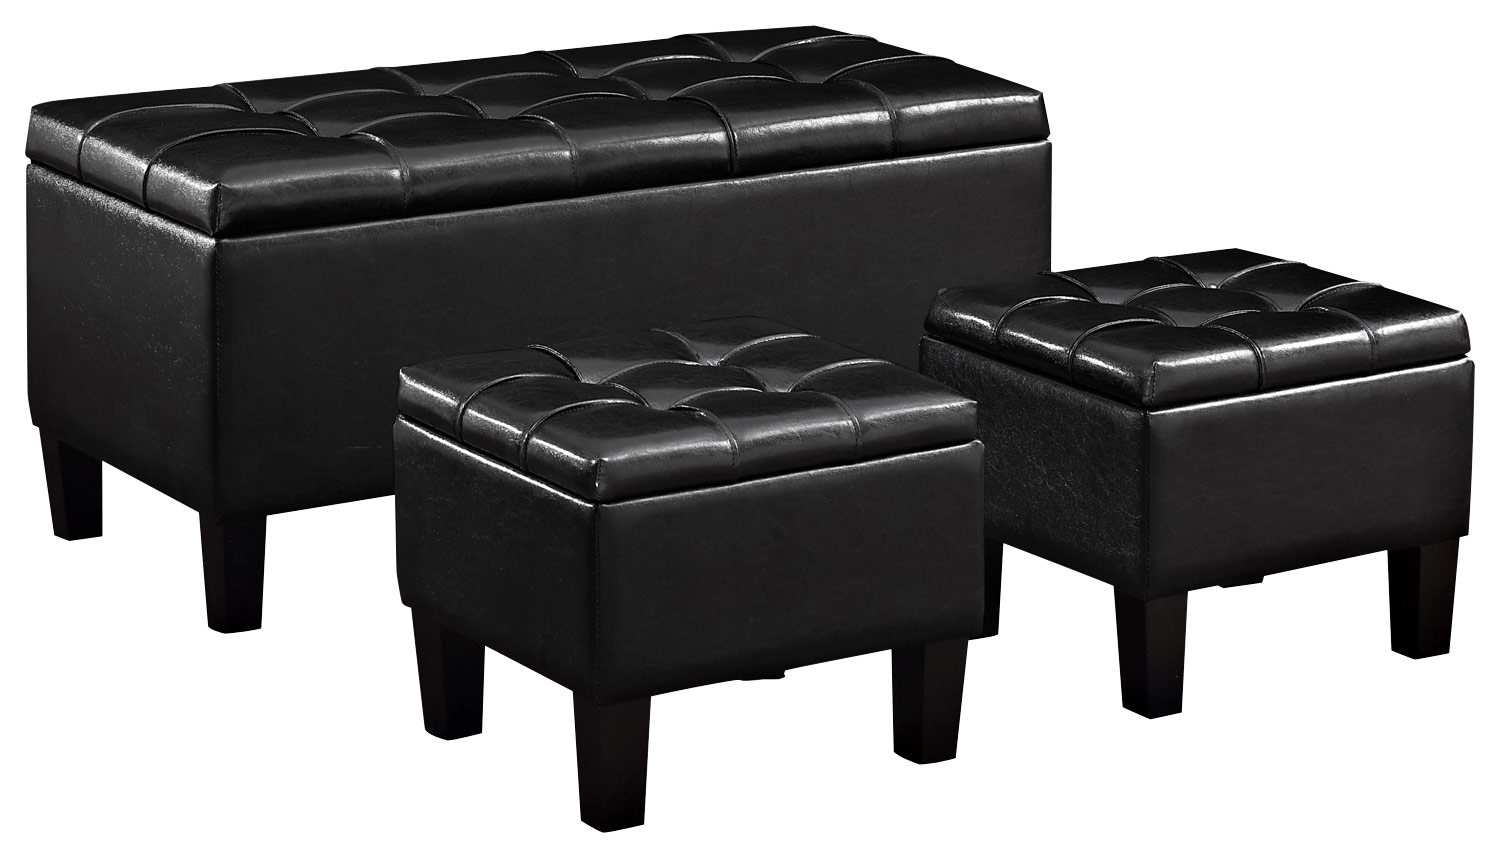 Simpli Home - Dover Rectangular Faux Leather Storage Ottoman Bench (Set of 3) - Midnight Black was $291.99 now $204.99 (30.0% off)